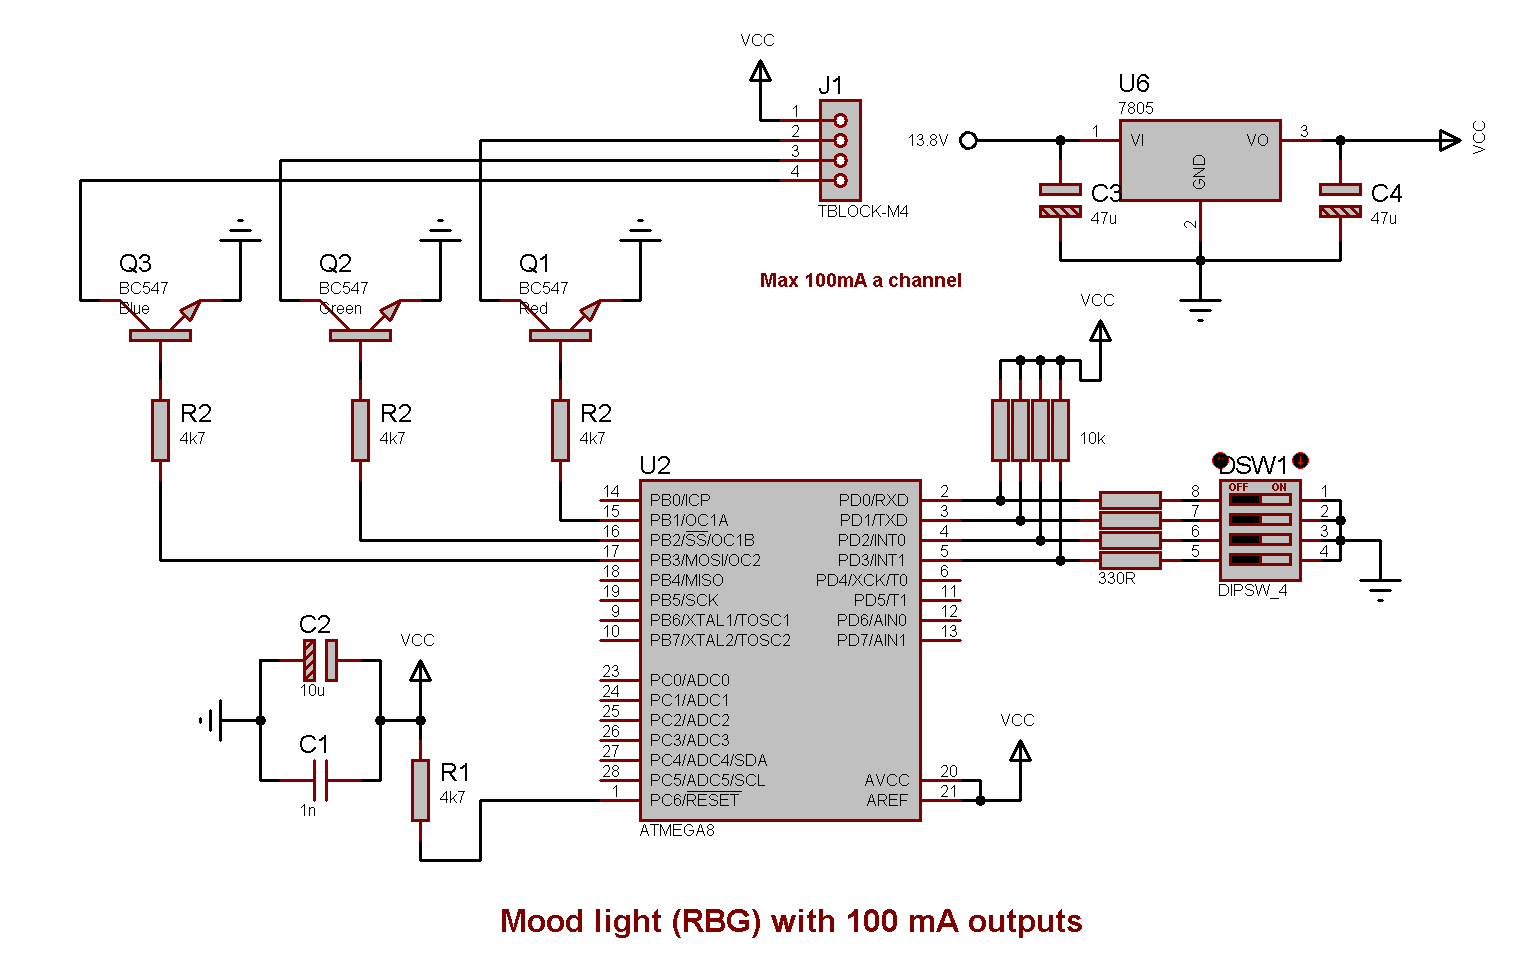 Schematics for the mood light controller